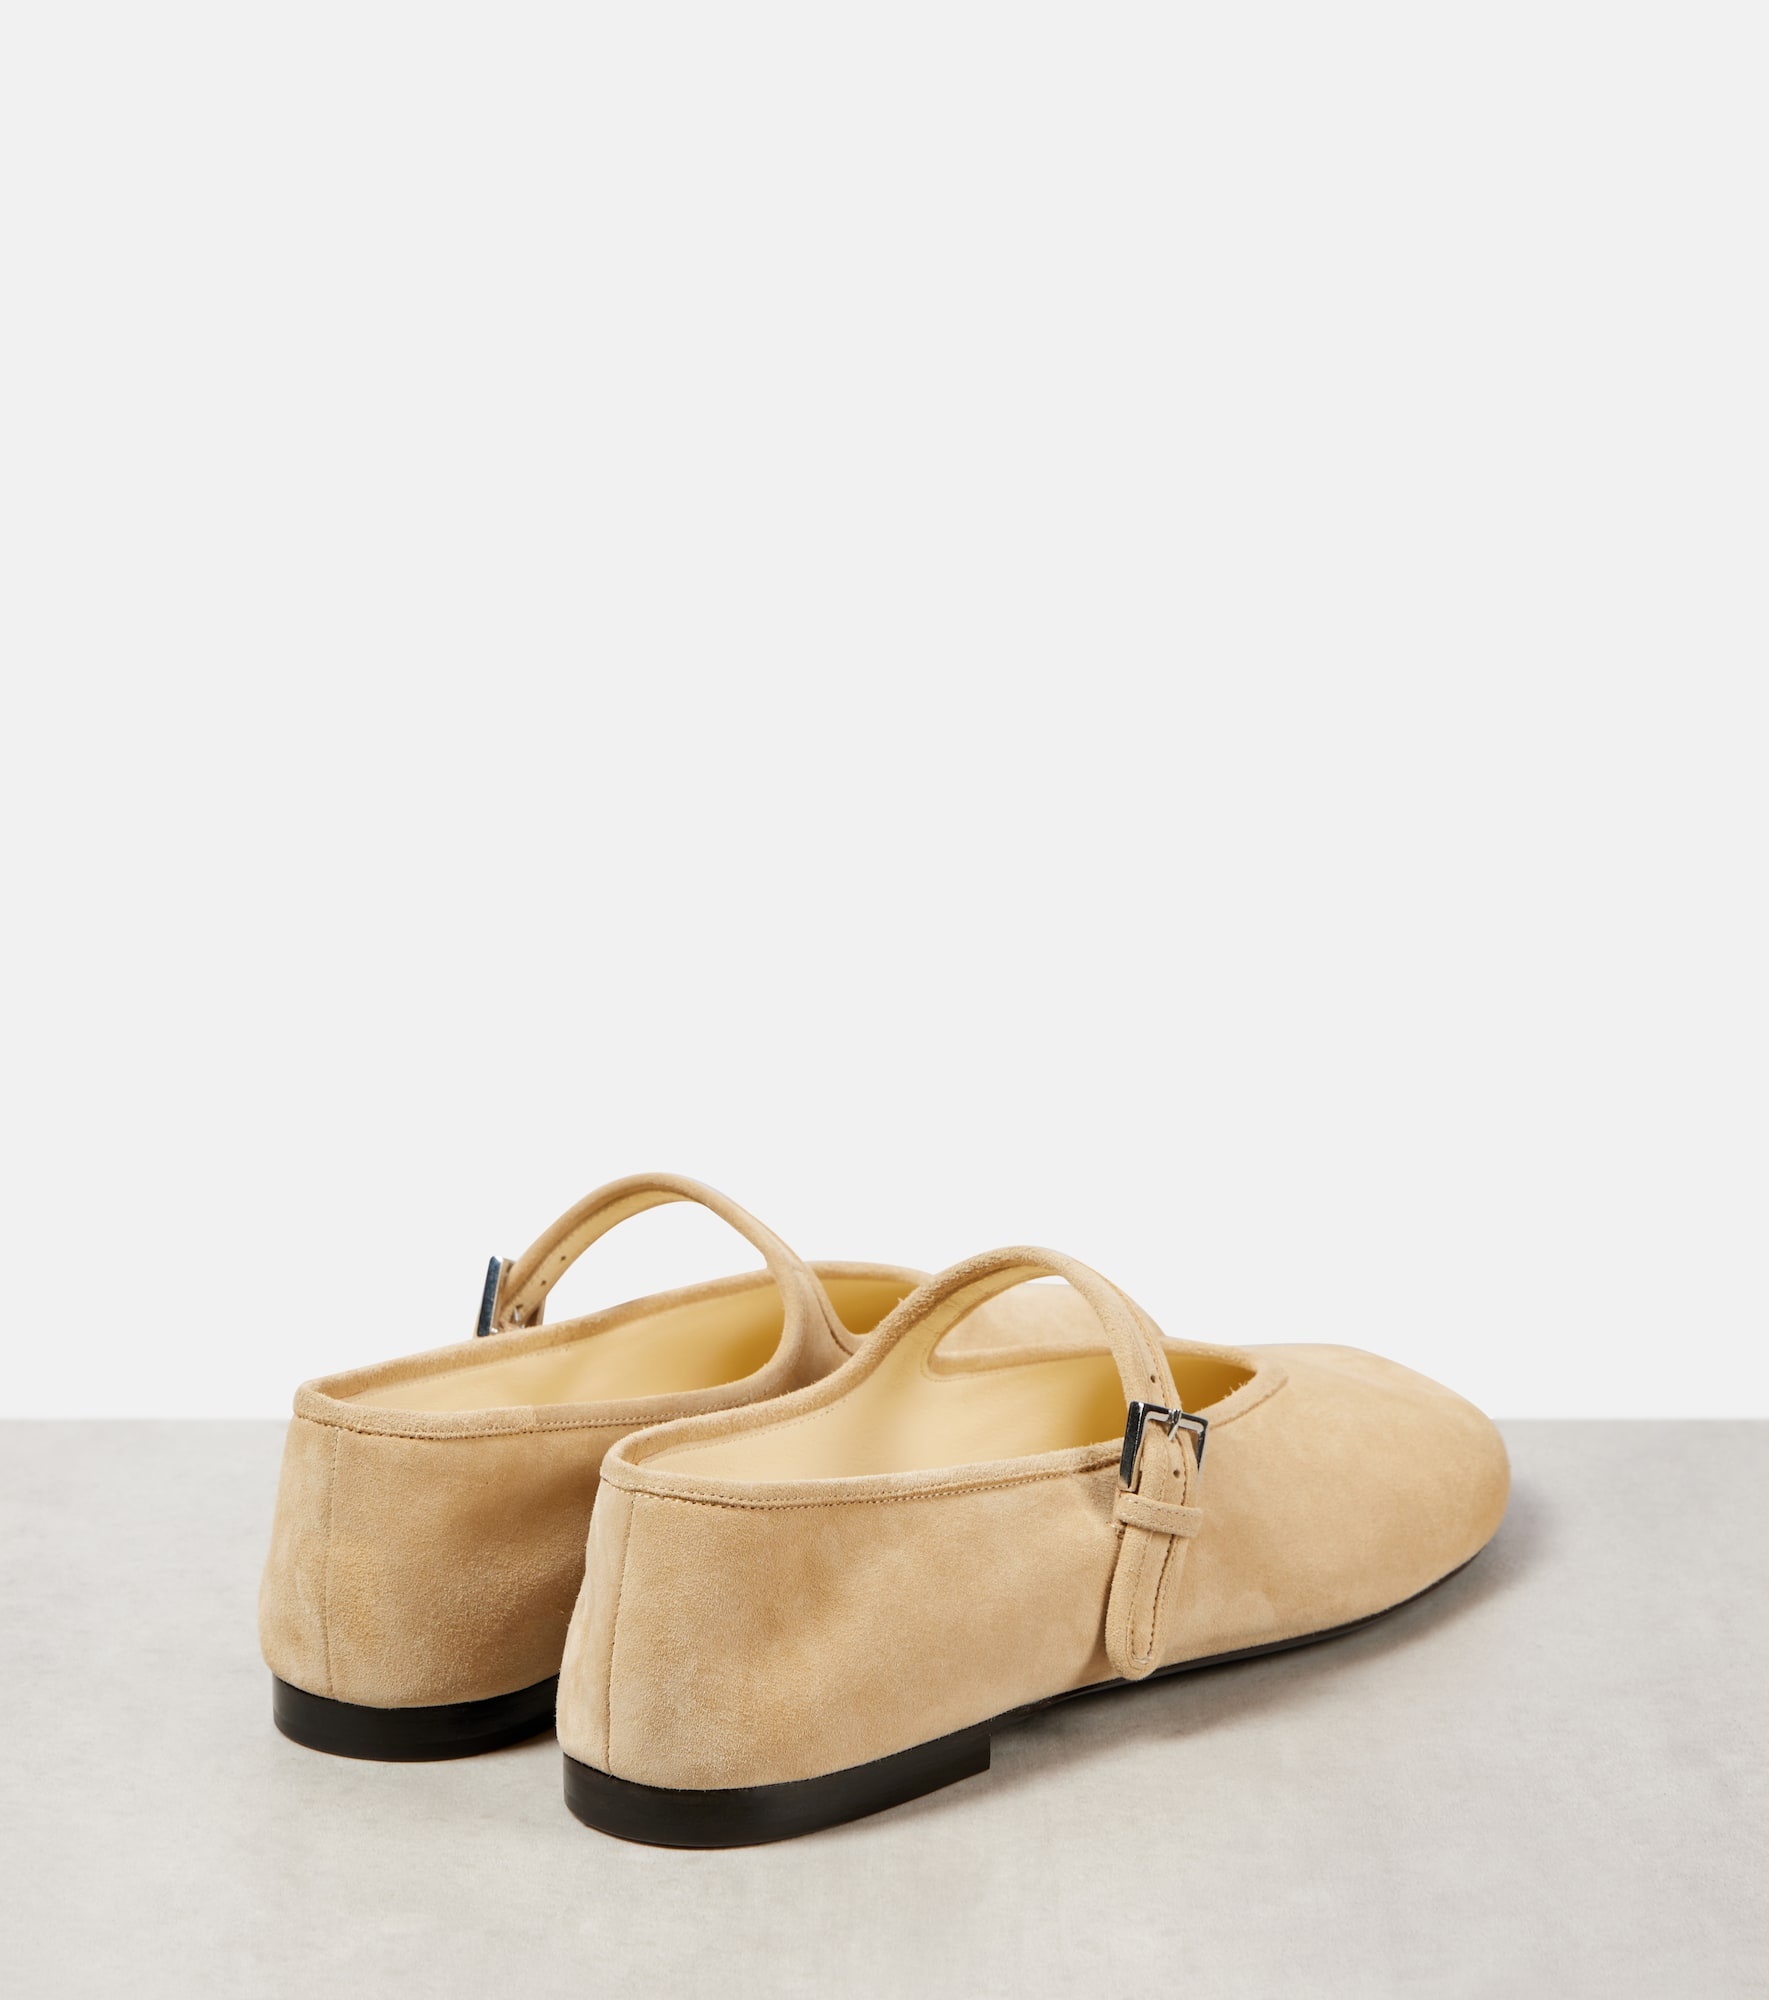 Suede Mary Jane flats - 2